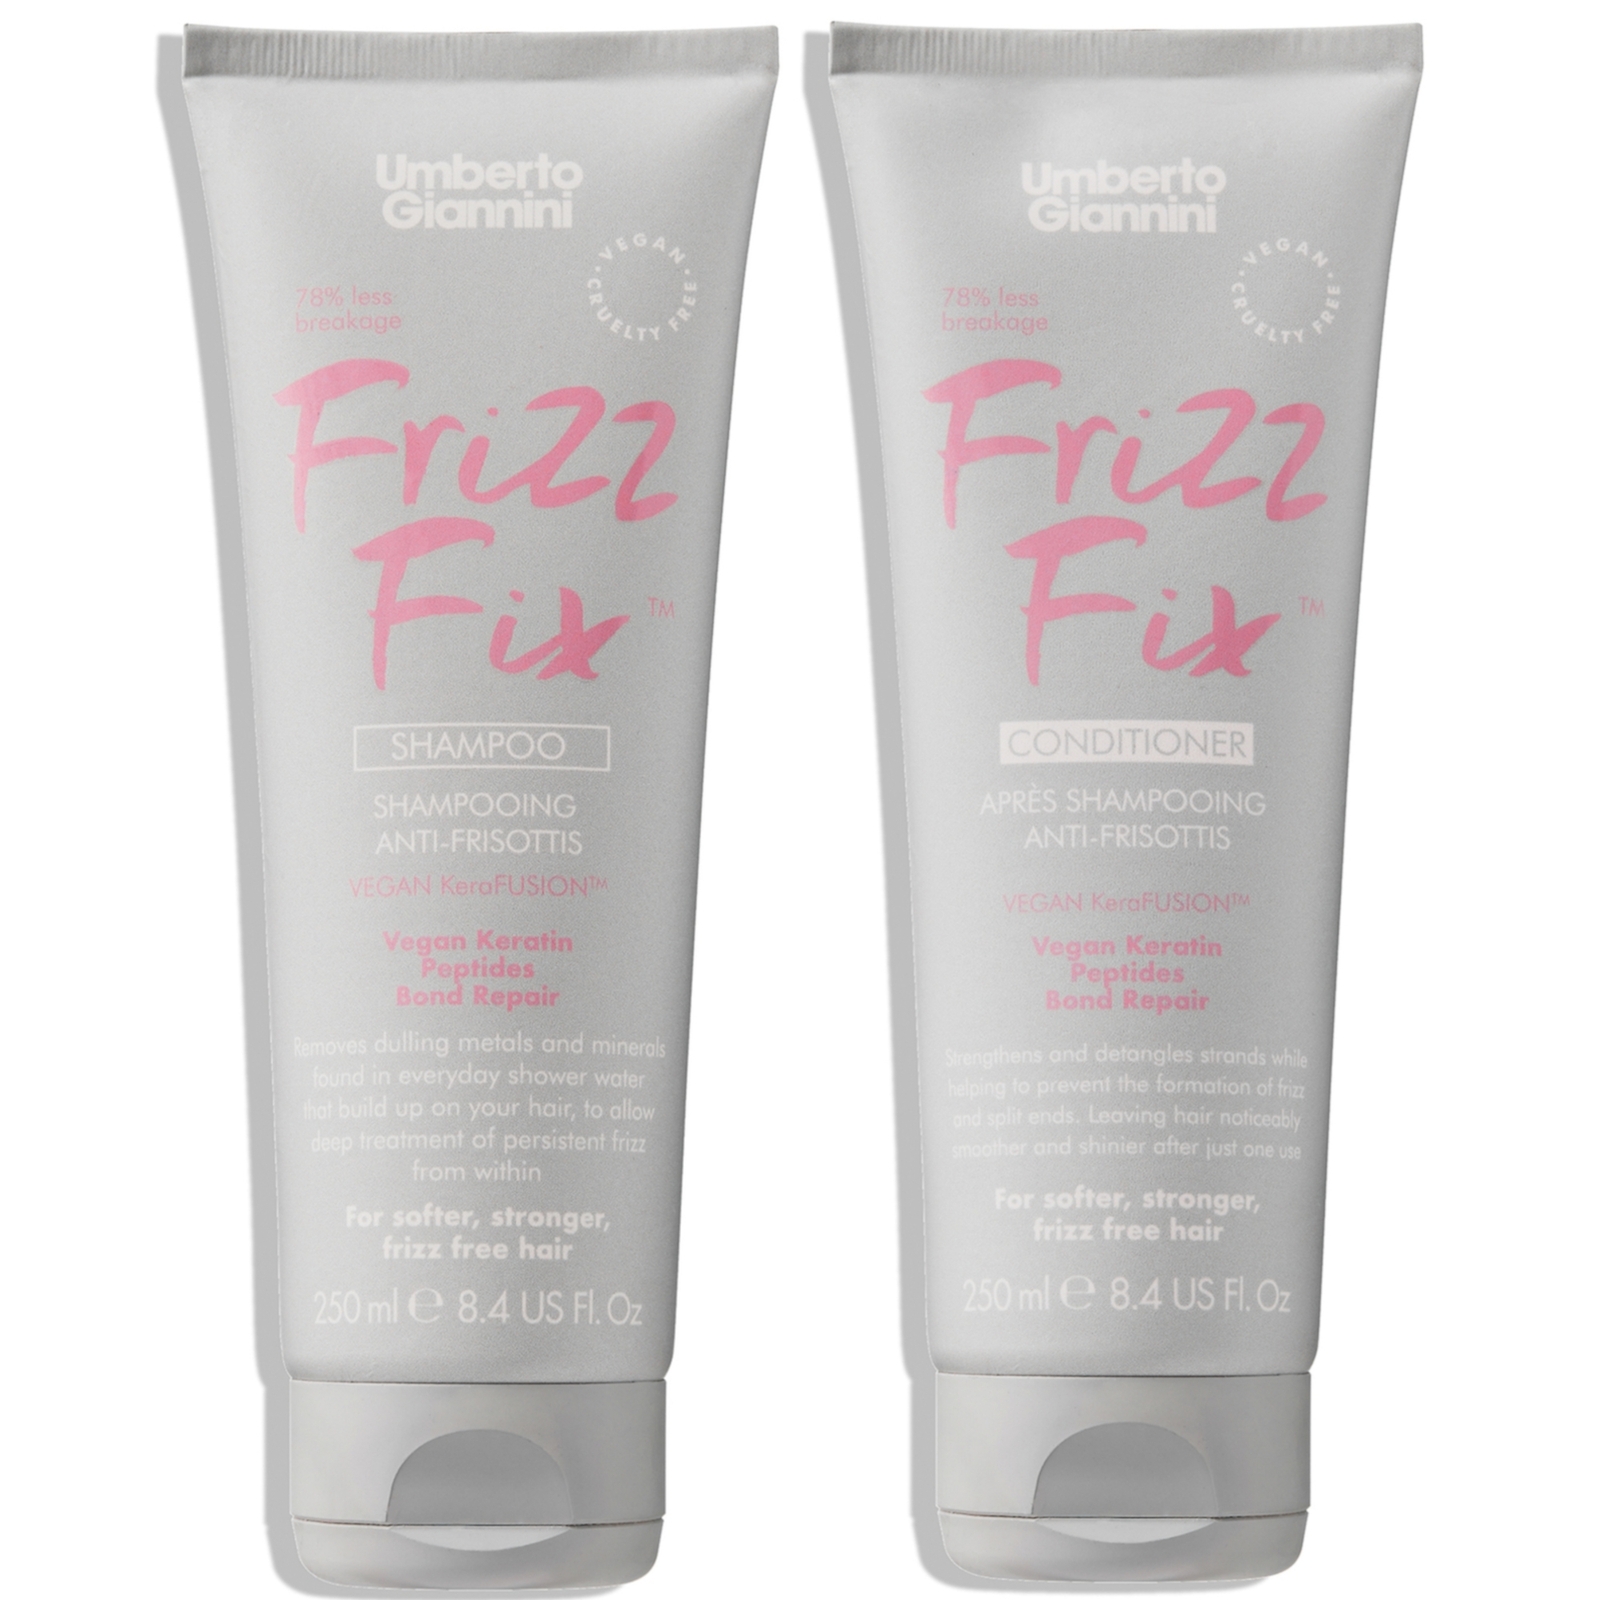 Image of Umberto Giannini Frizz Fix Shampoo and Conditioner Duo